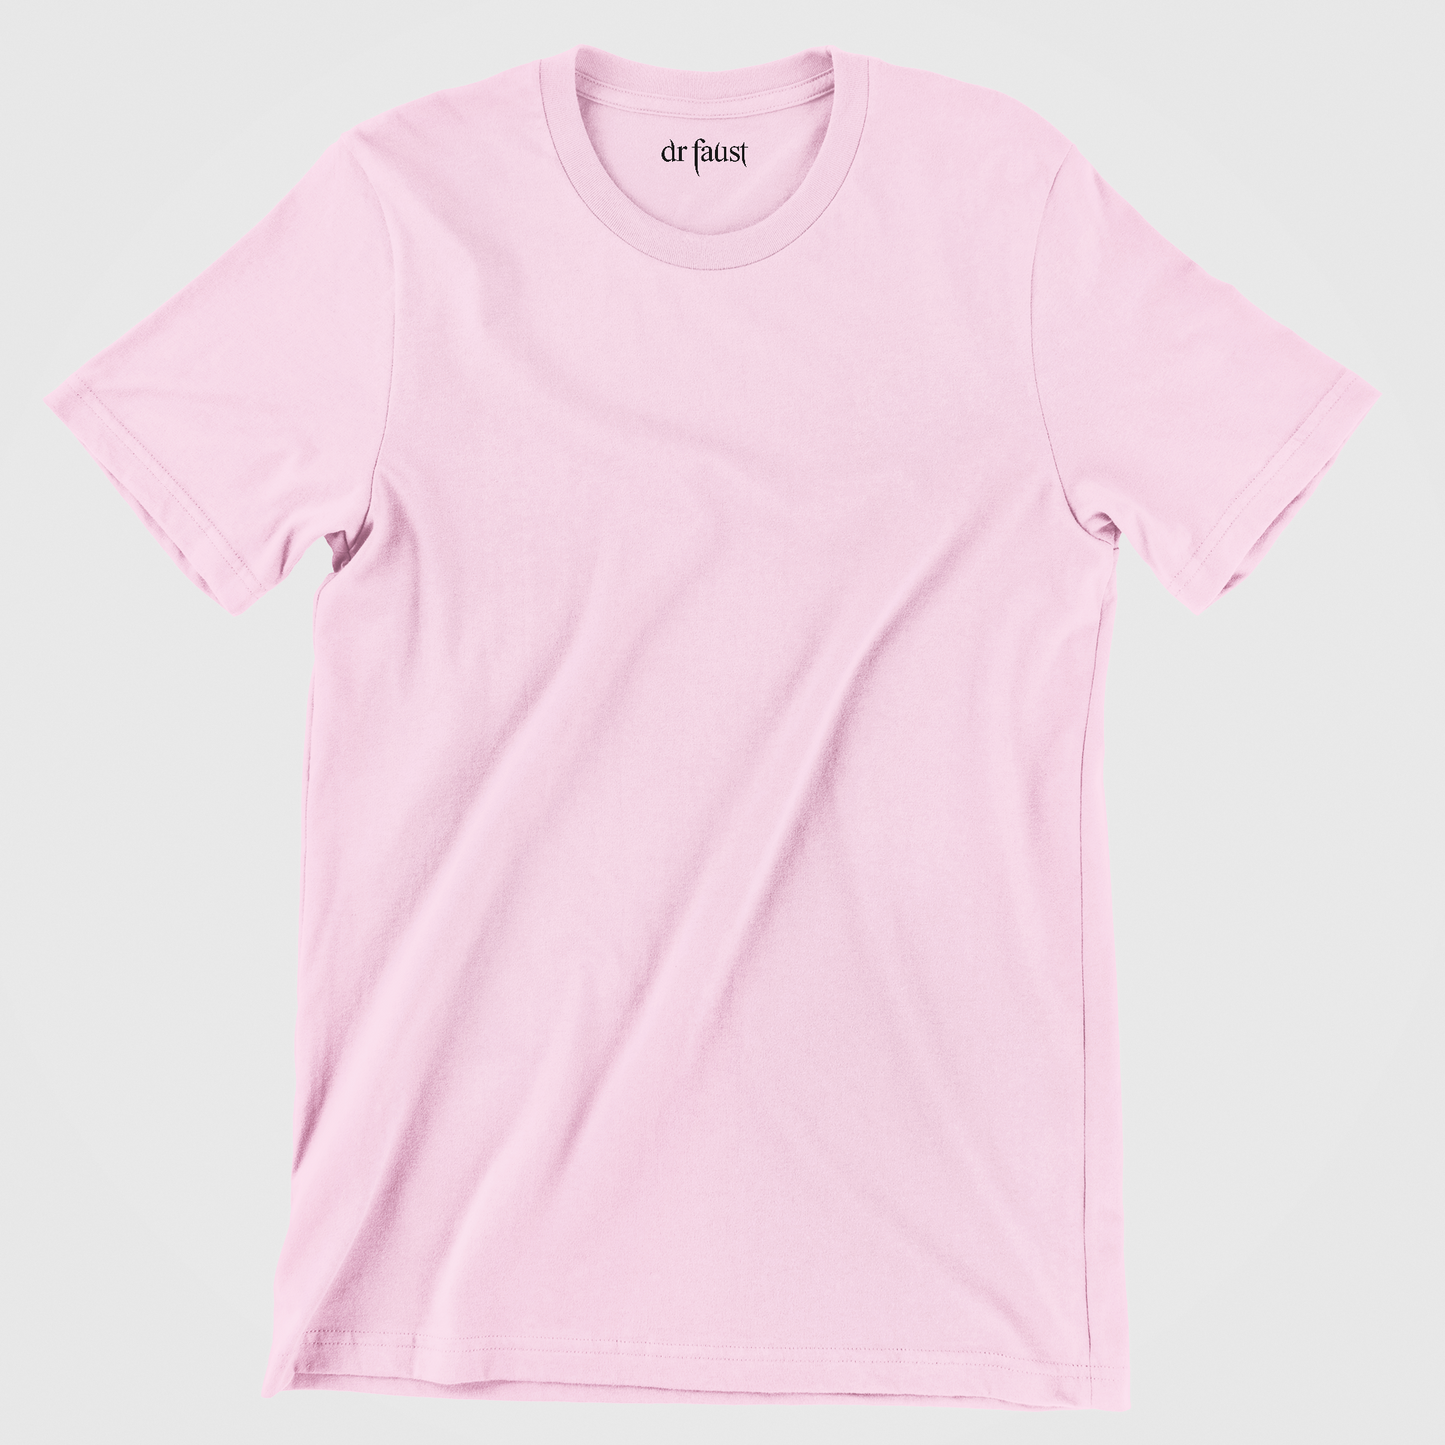 Dr Faust Solid Pink Unisex T-shirt.